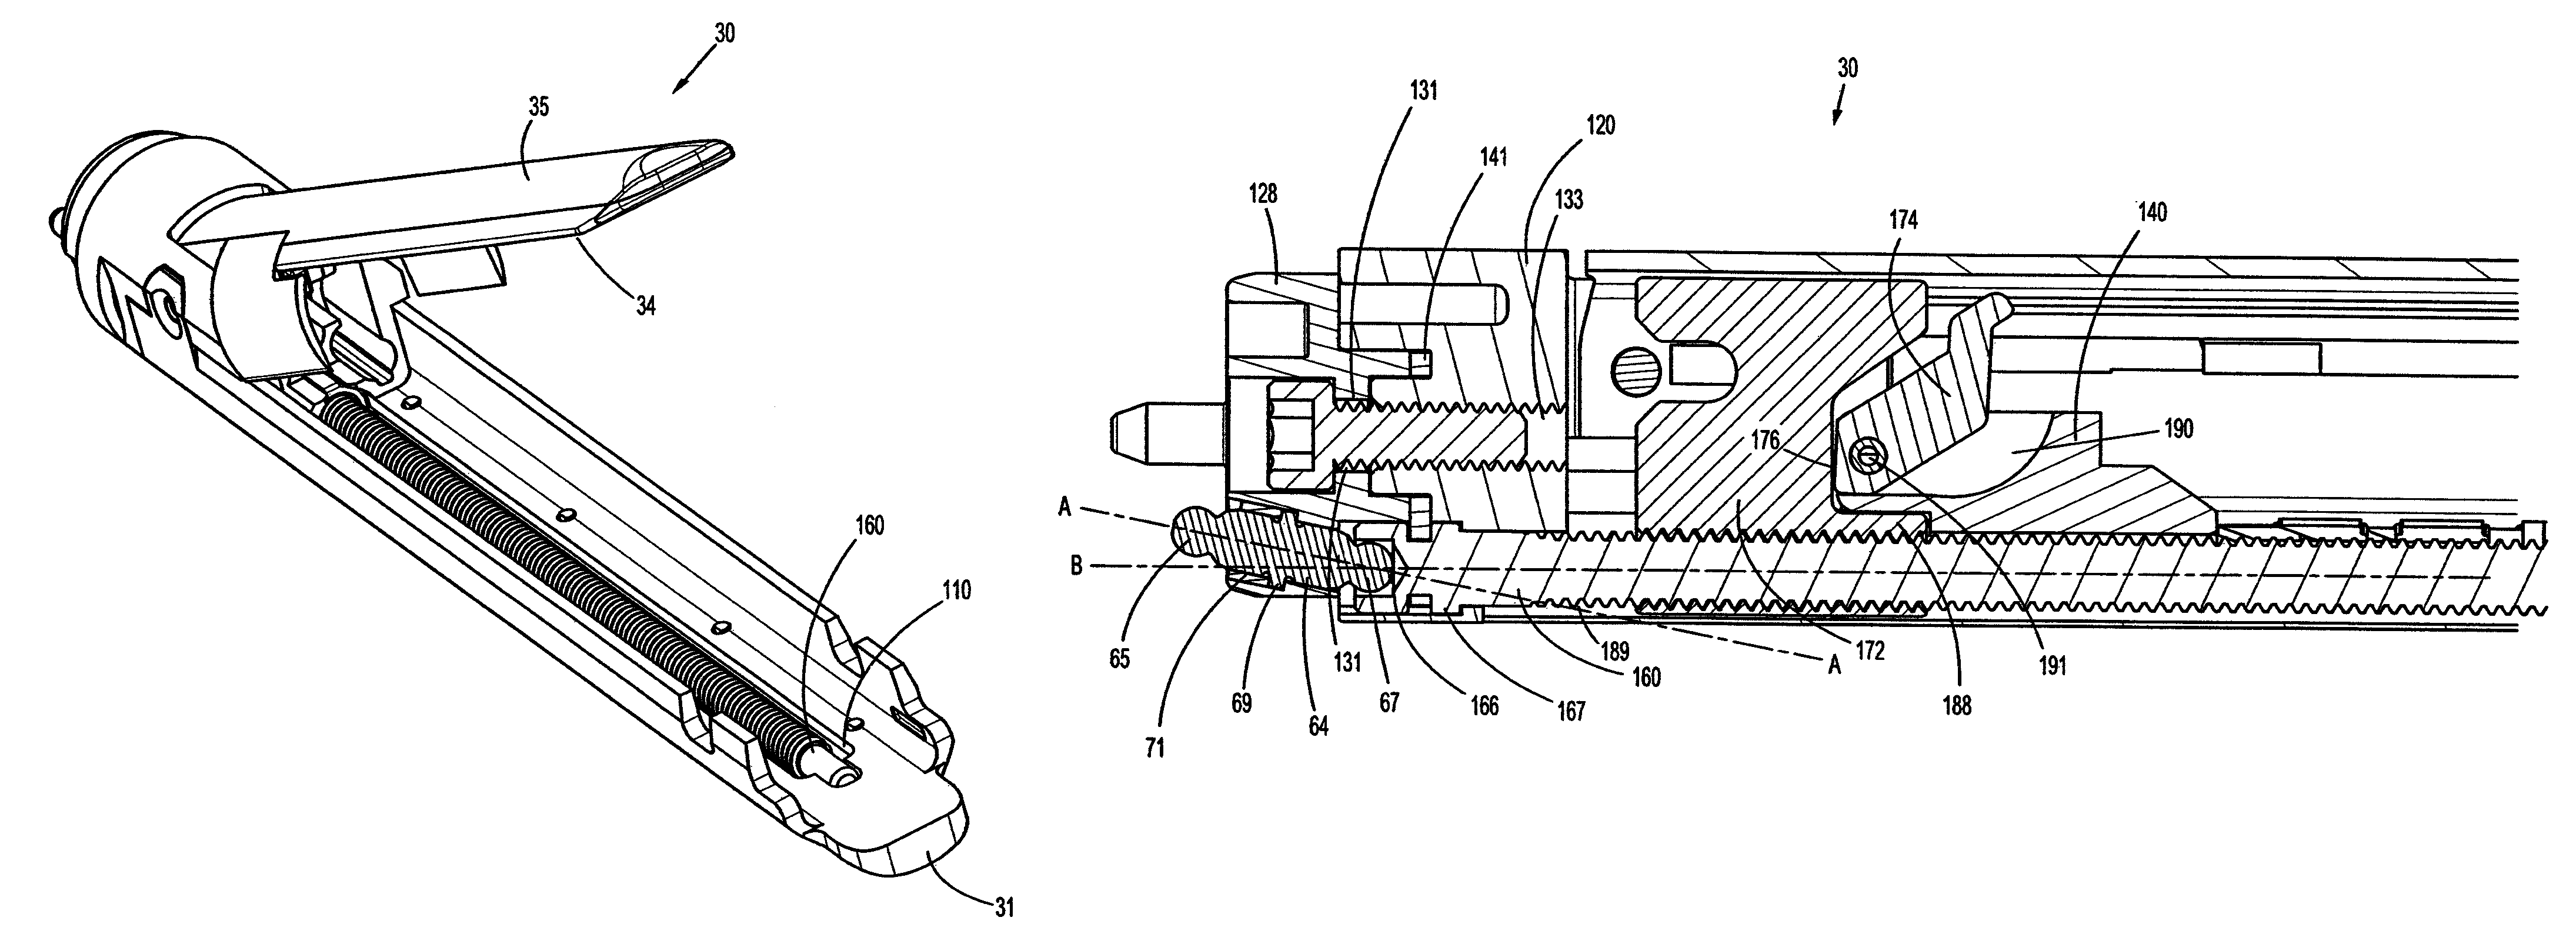 Surgical apparatus and method for endoscopic surgery